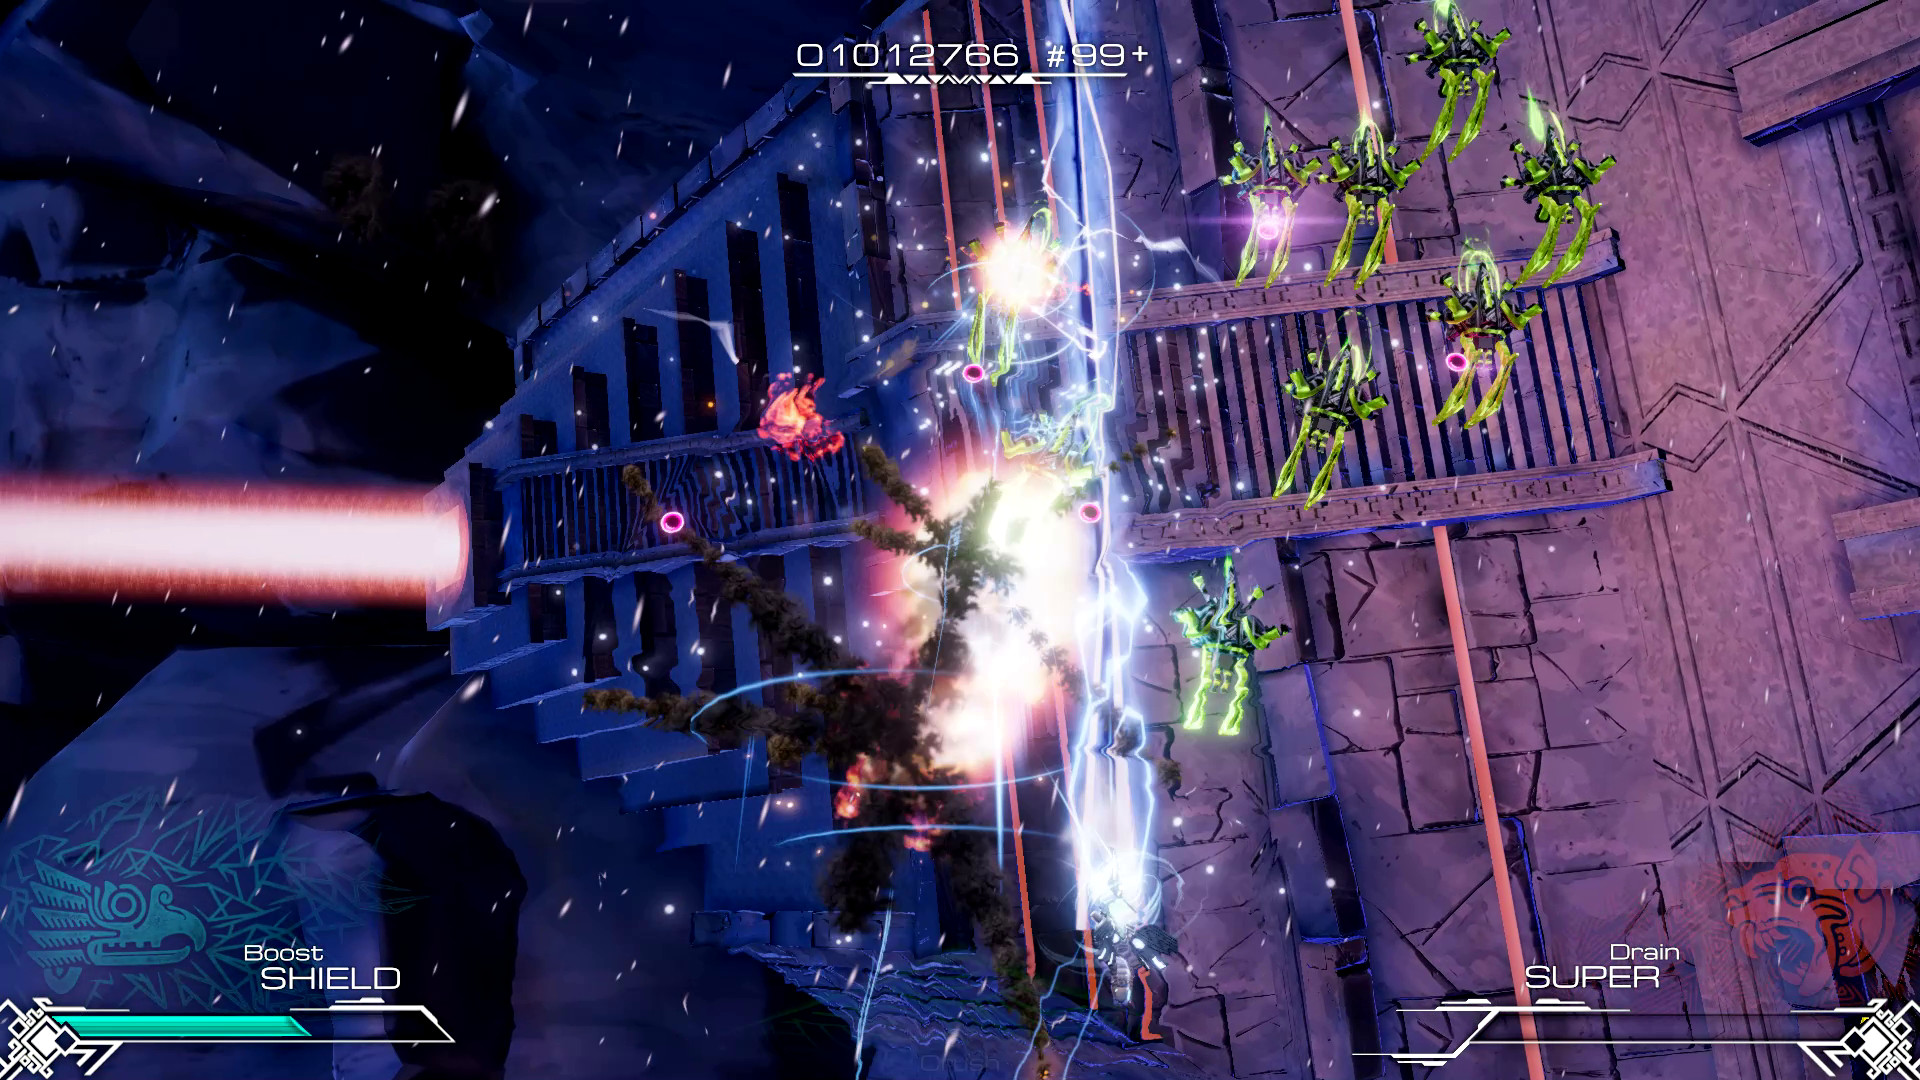 Orbital Bullet: An Exhilarating 2.5D Roguelike With Rotating 360° Levels